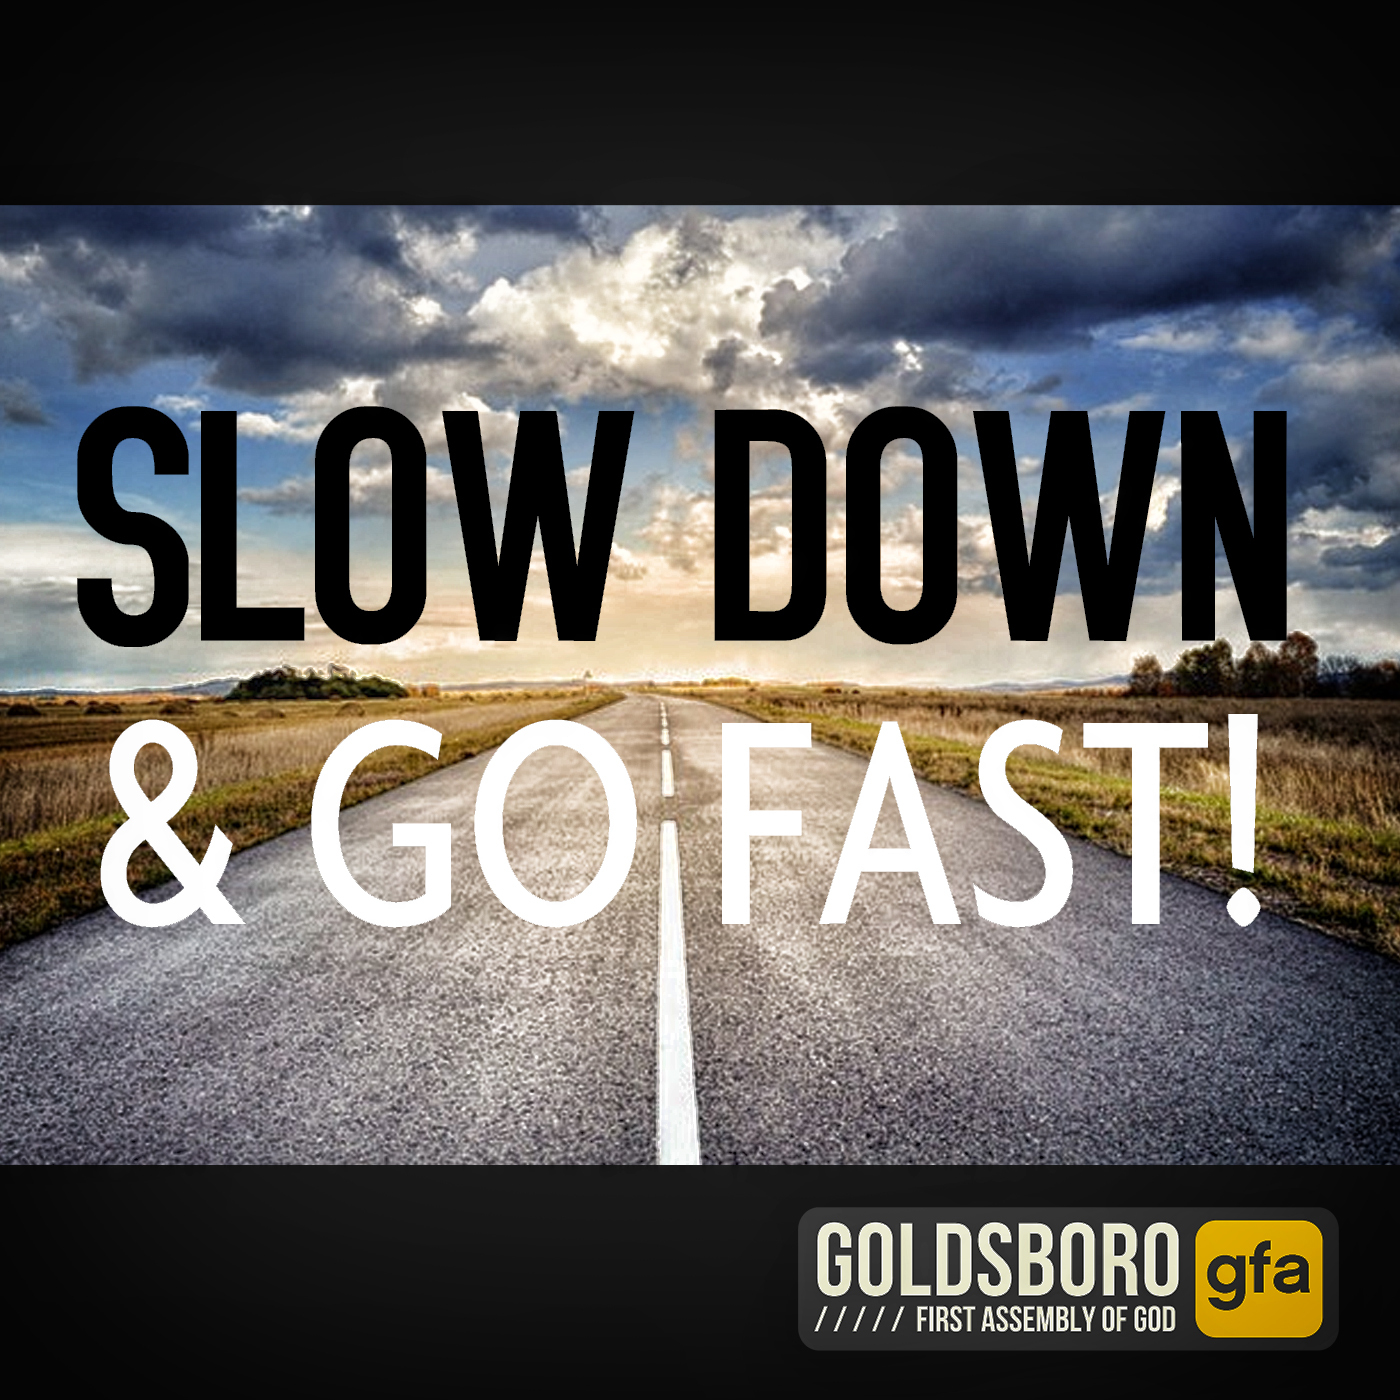 Slow Down and Go Fast